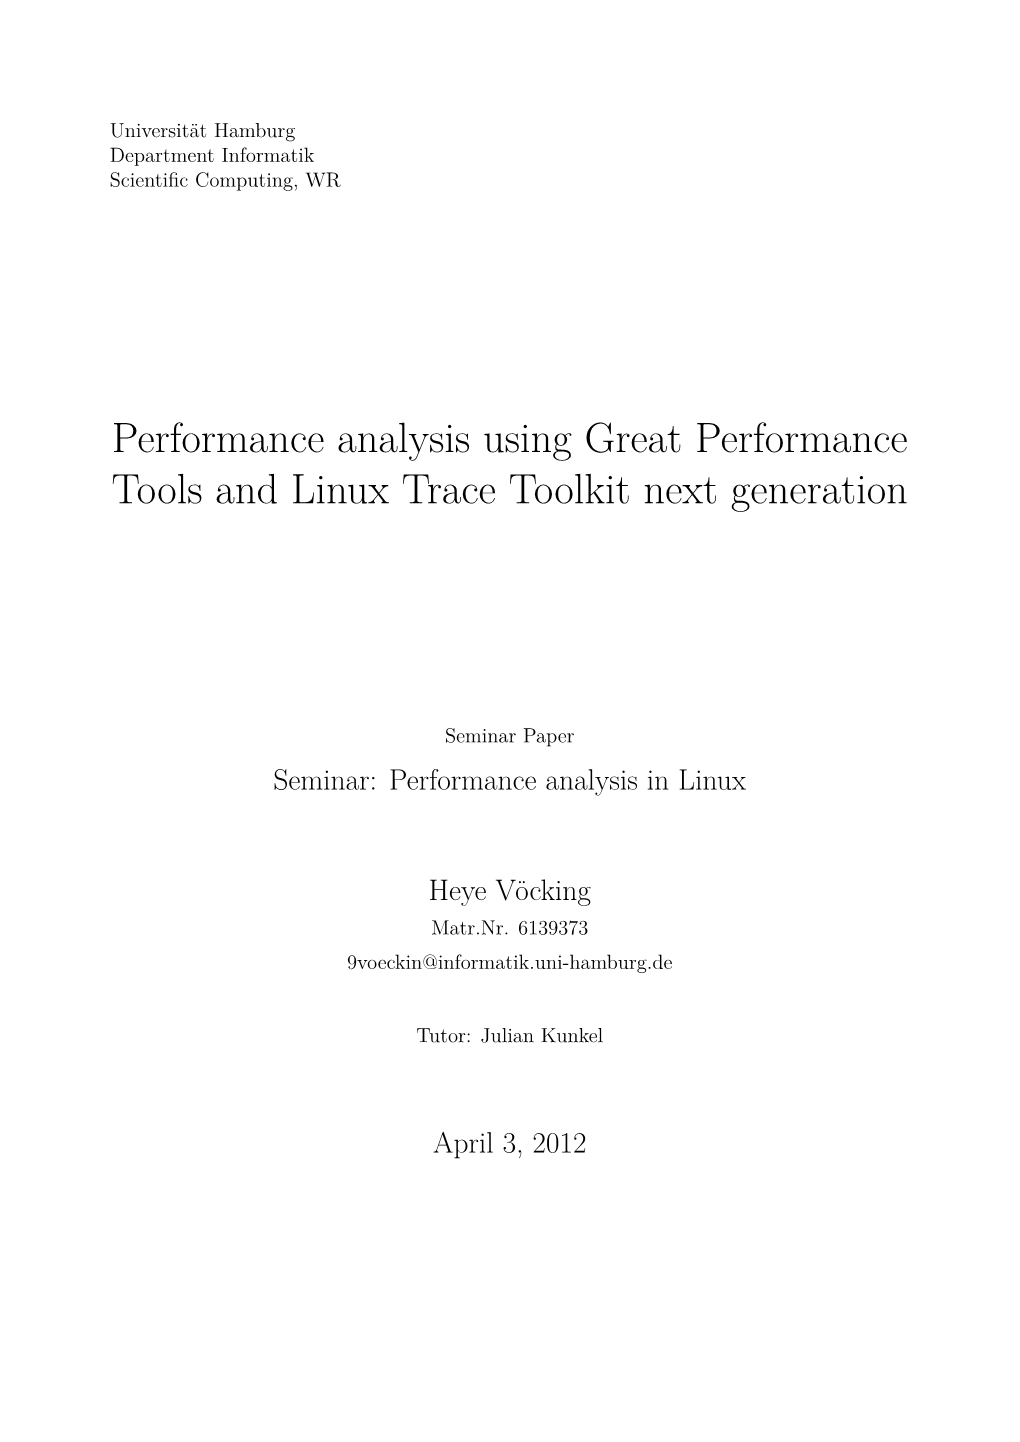 Performance Analysis Using Great Performance Tools and Linux Trace Toolkit Next Generation